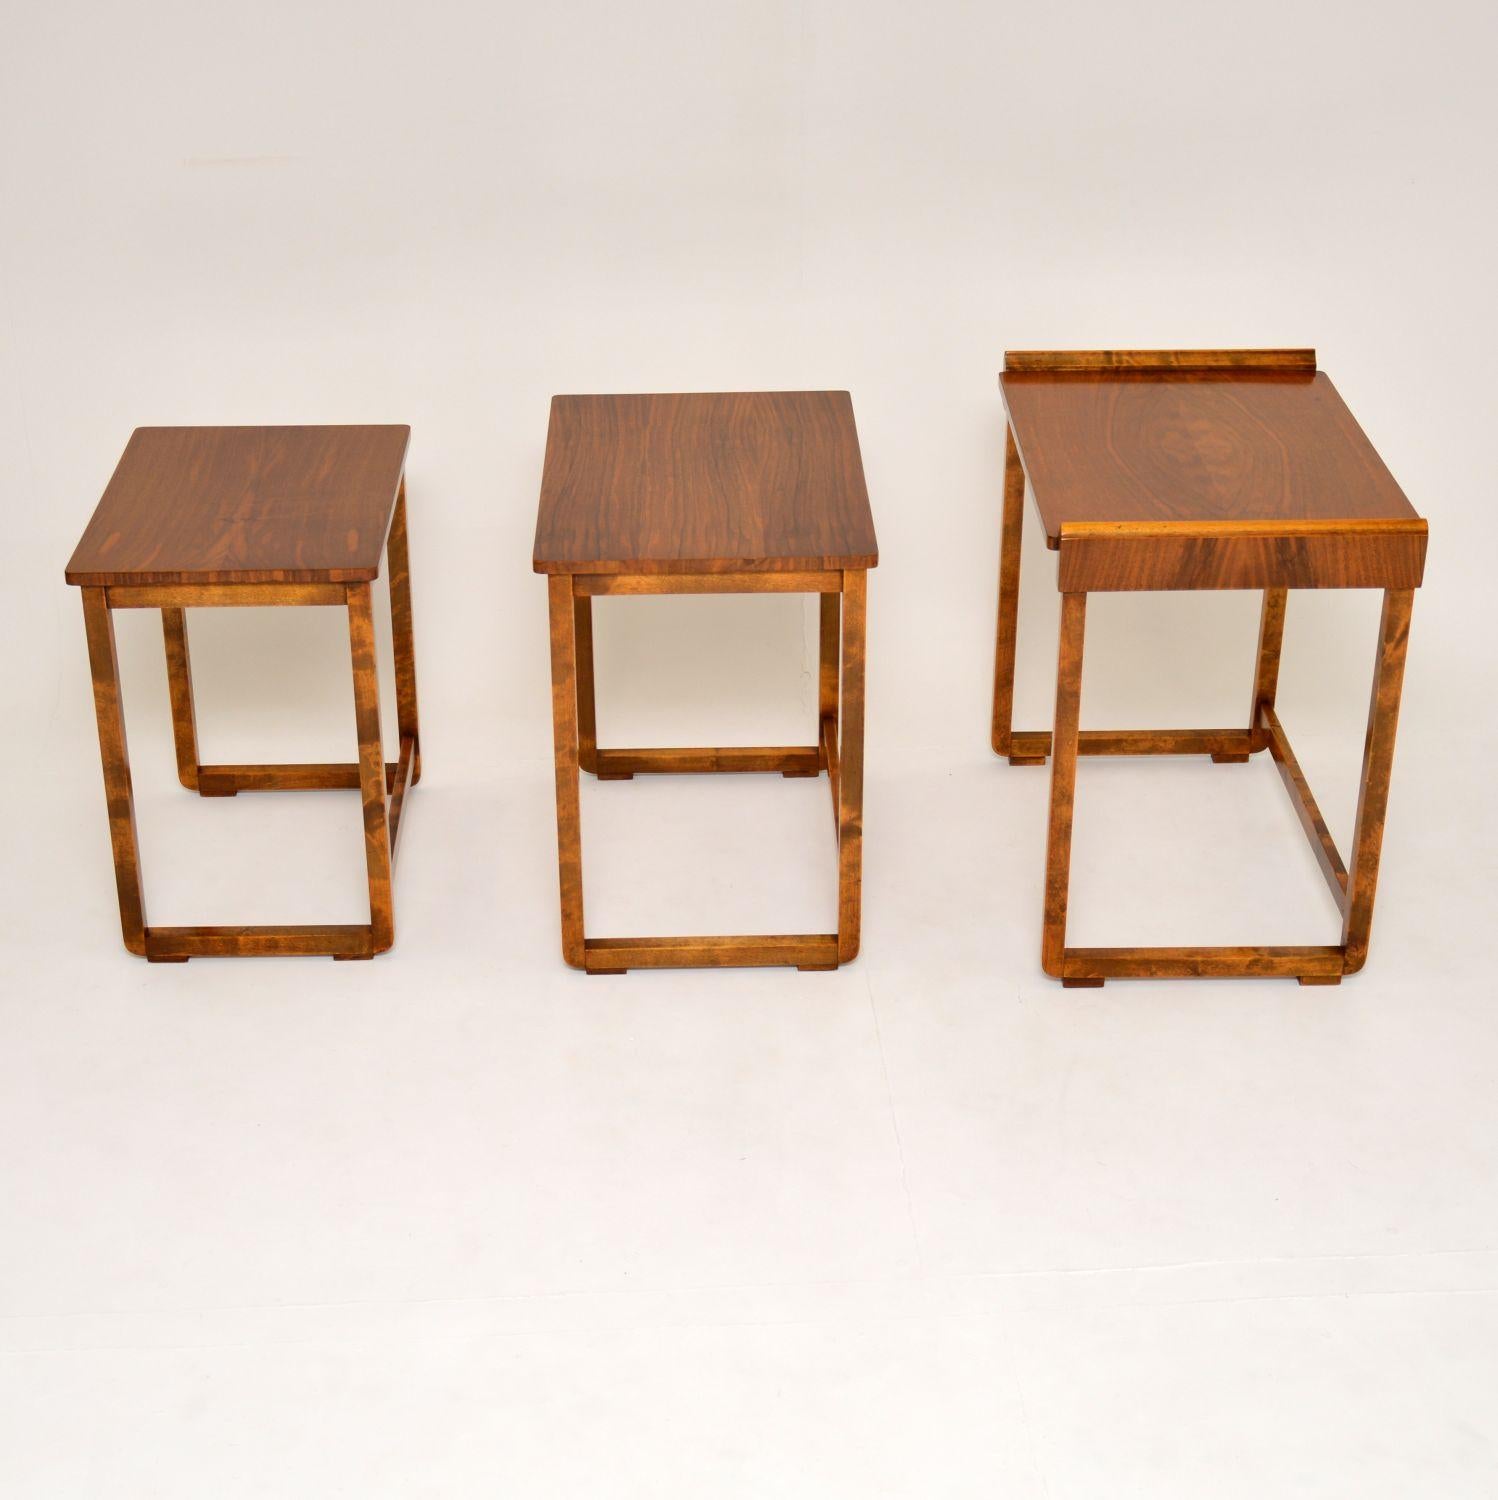 A stunning original Art Deco period nest of tables in walnut. These were made in England, they date from circa 1920s-1930s.

They are of amazing quality and have an unusual design. The legs are U-shaped, and the table tops have thick walnut edges.